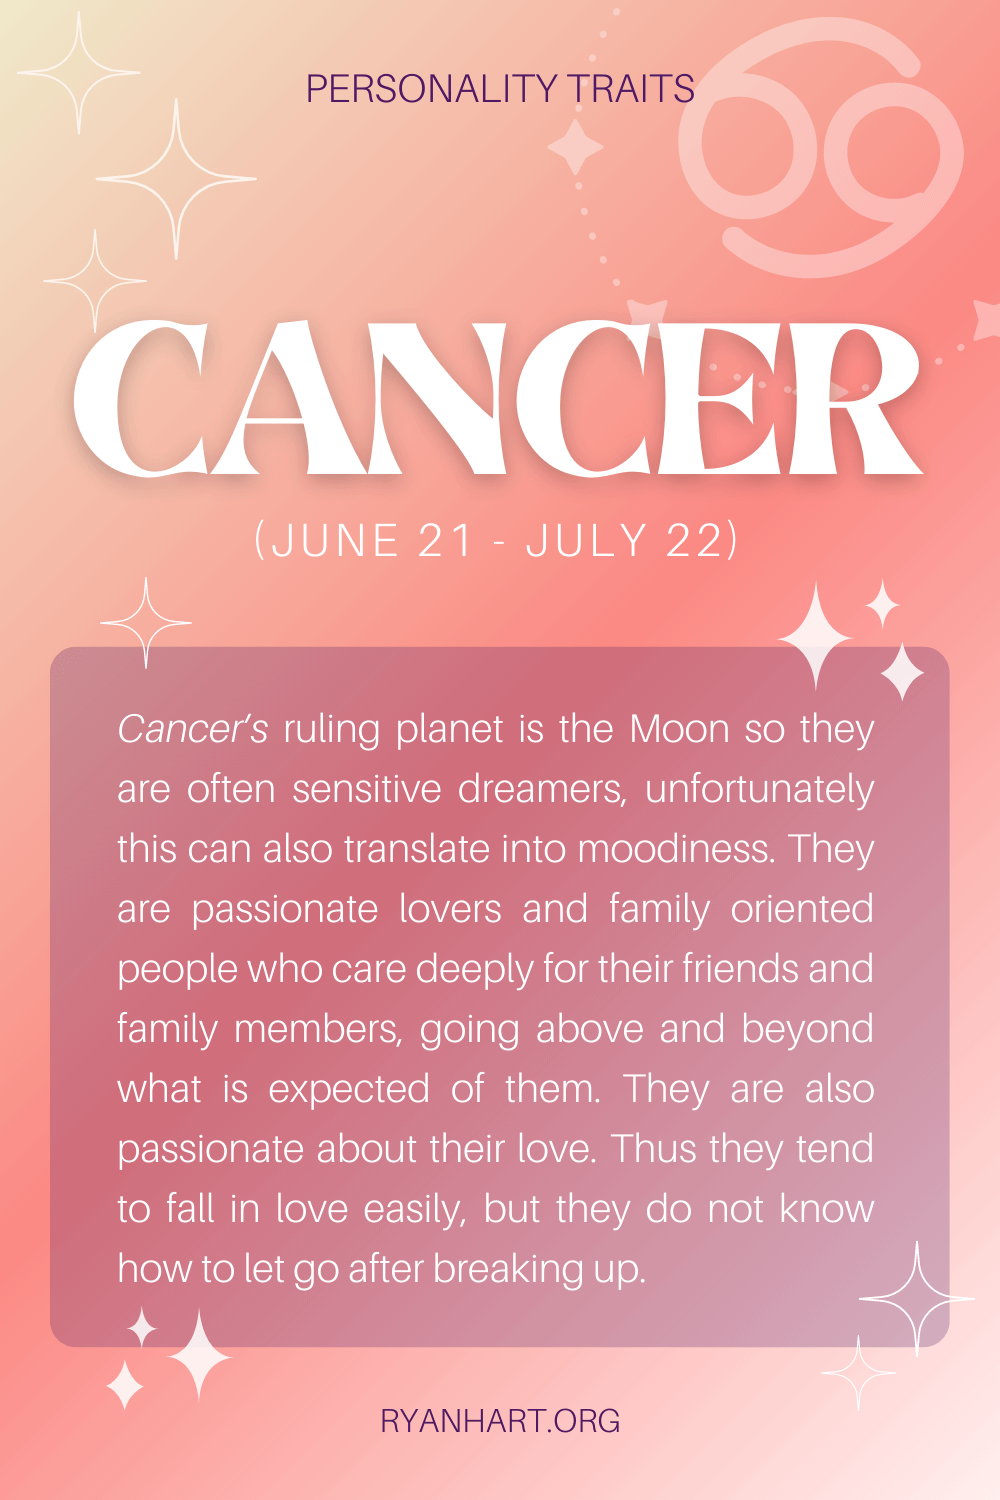 Cancer zodiac sign: Personality traits, careers, and more